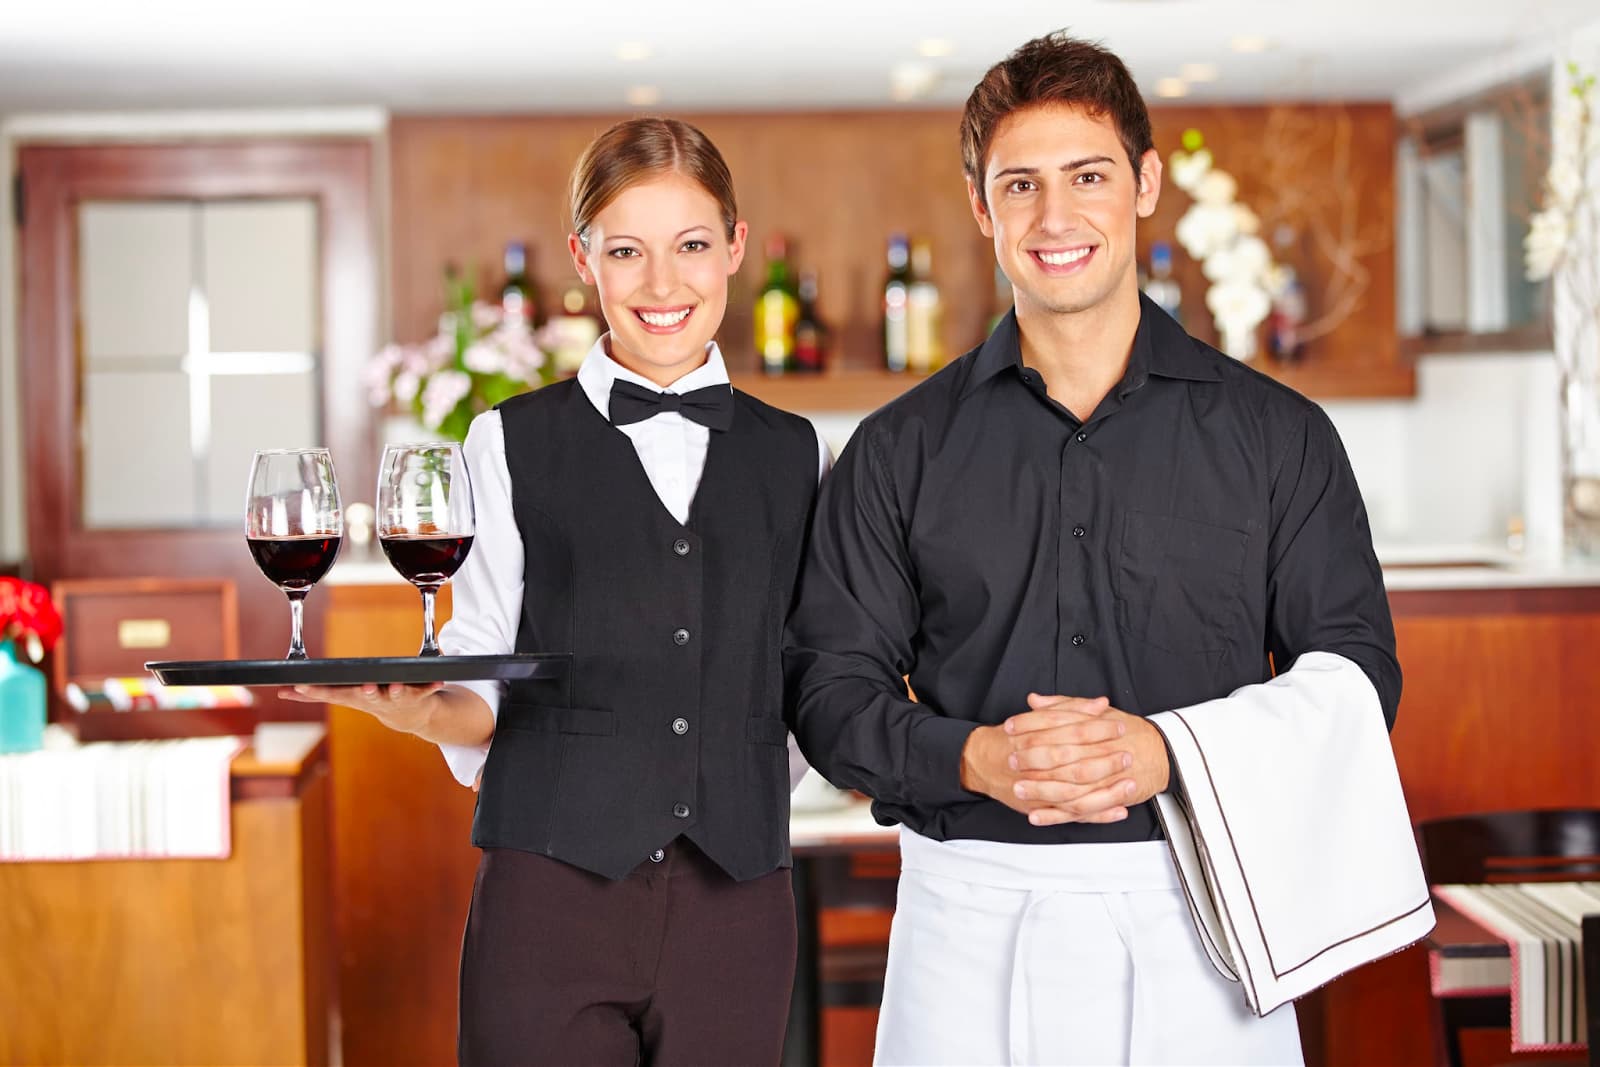 How to Improve the Level of Restaurant Service